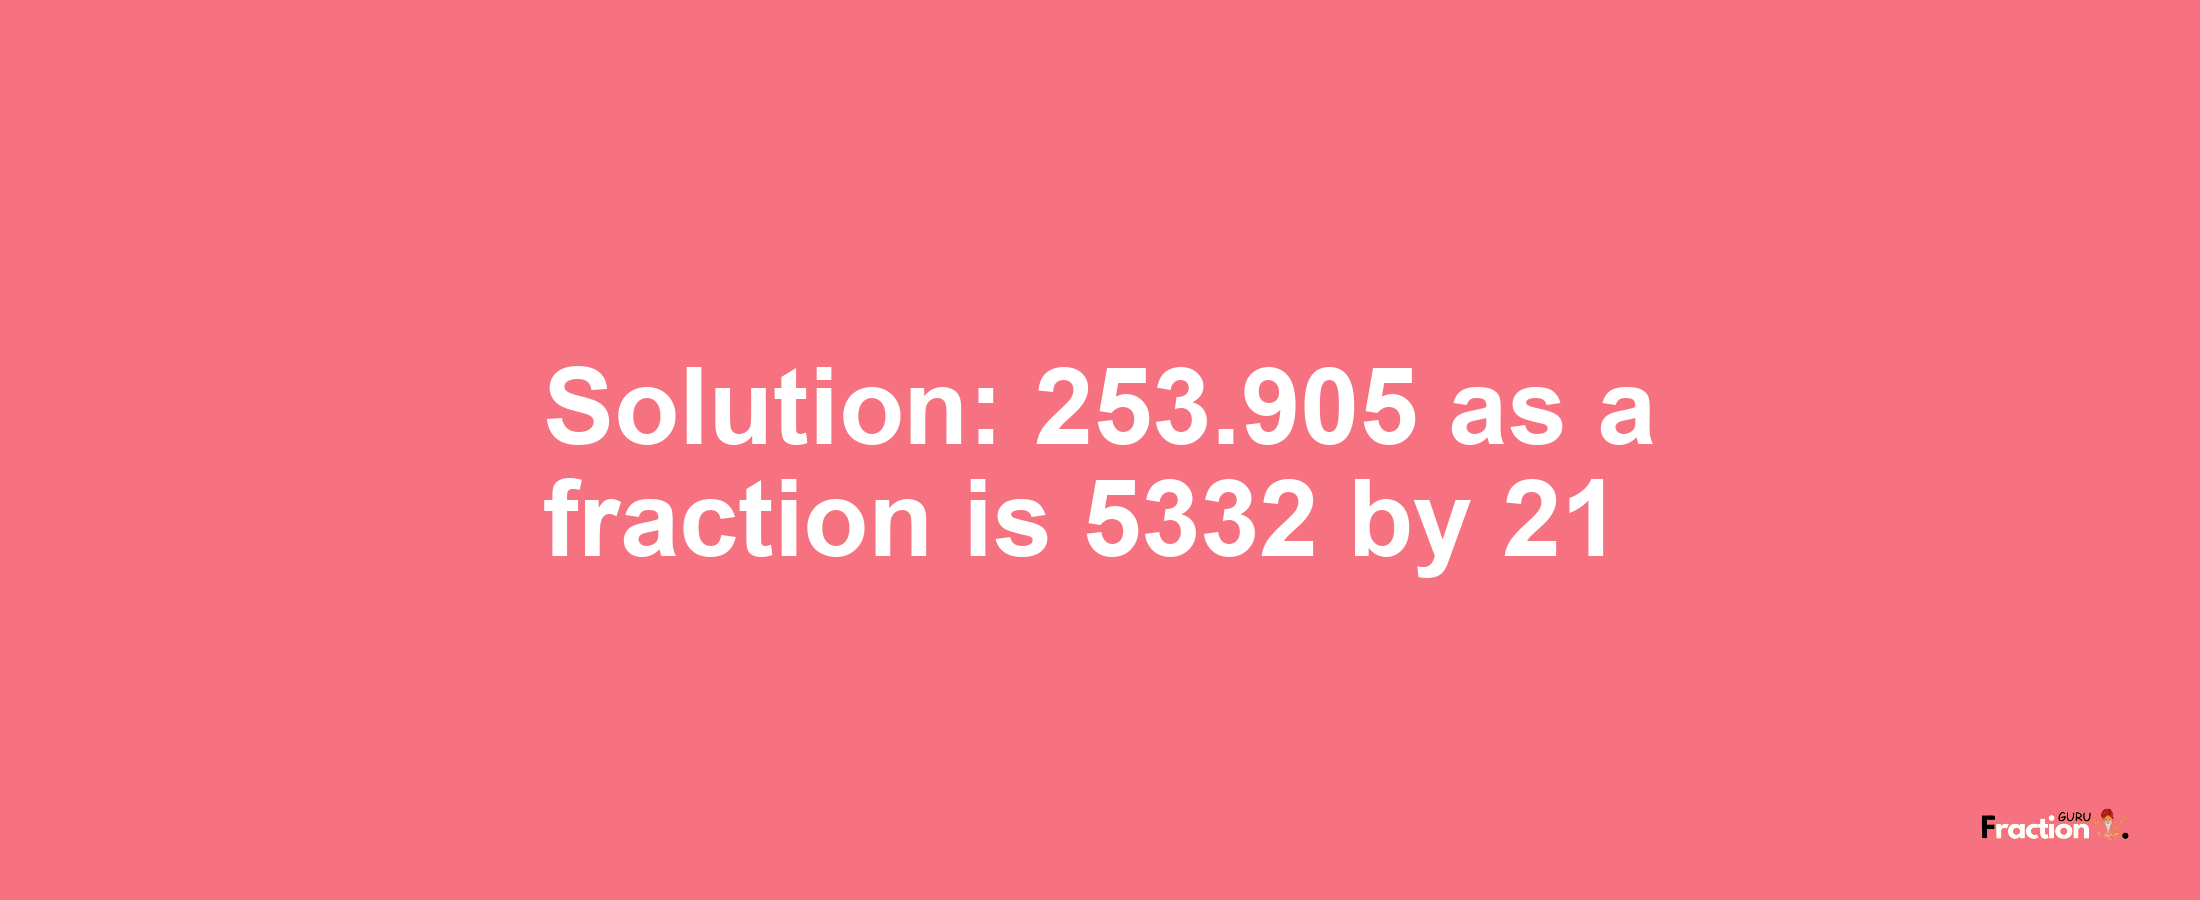 Solution:253.905 as a fraction is 5332/21